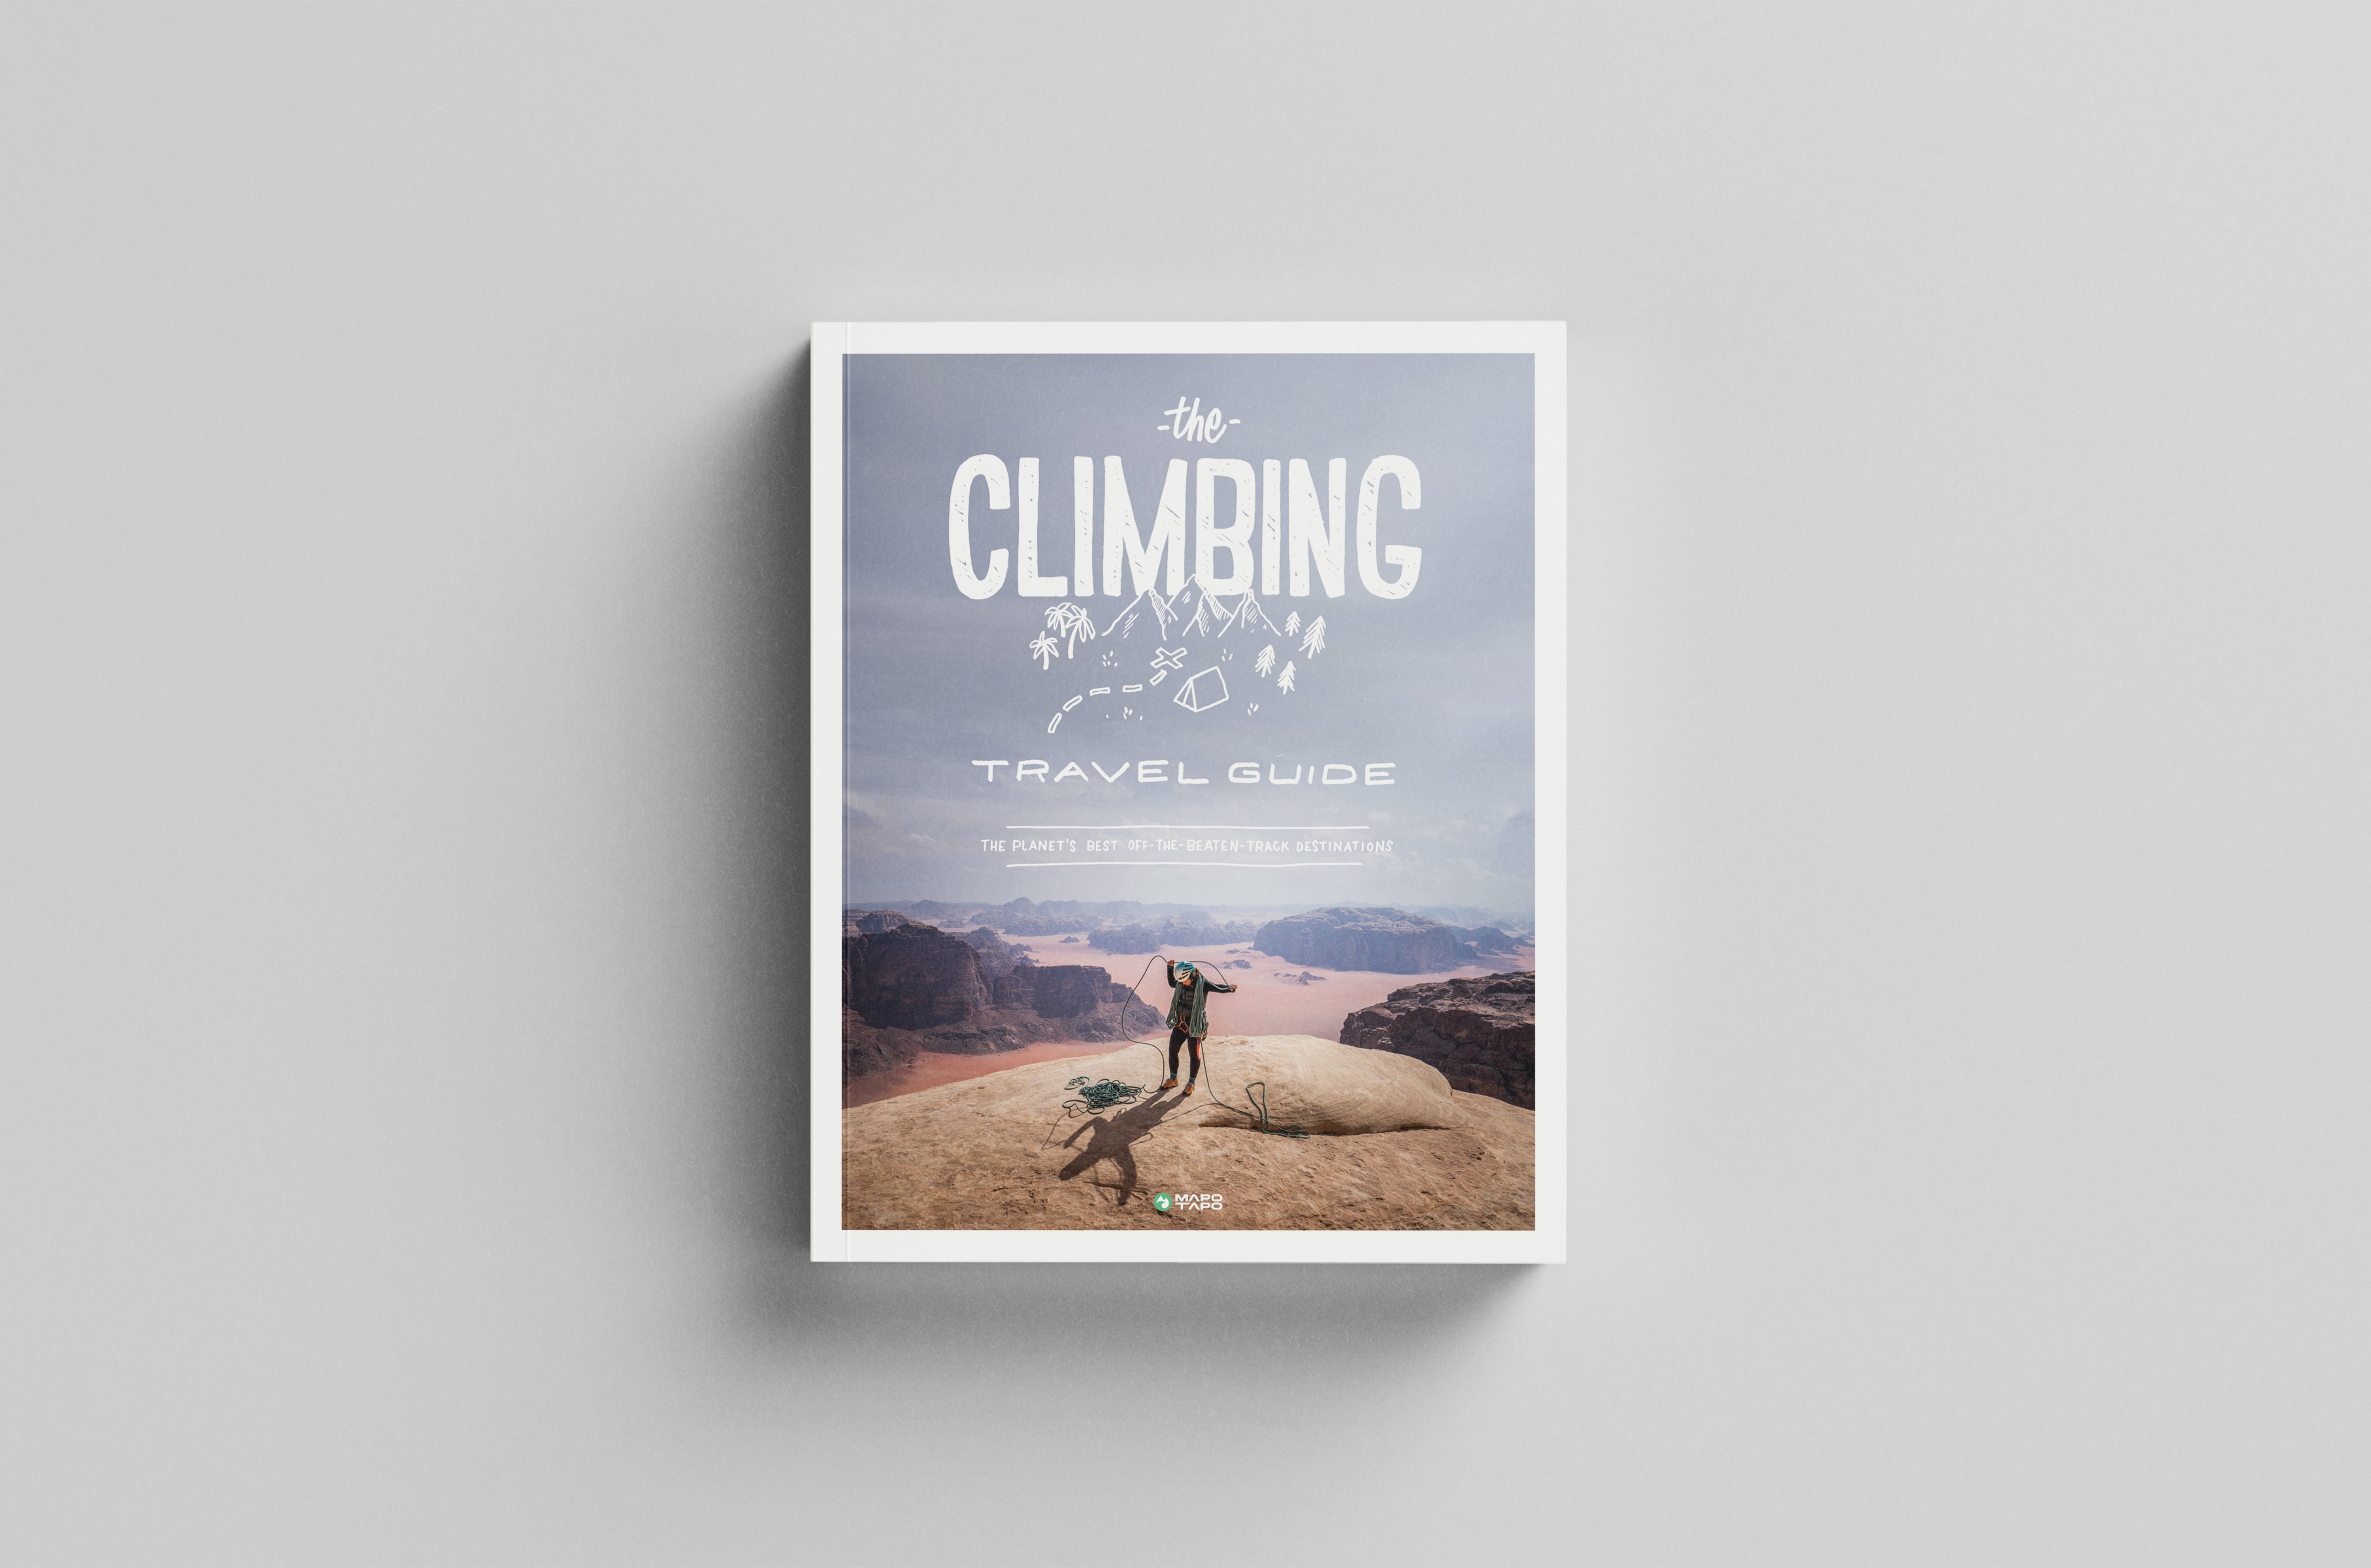 A picture of the cover of the Climbing Travel Guide